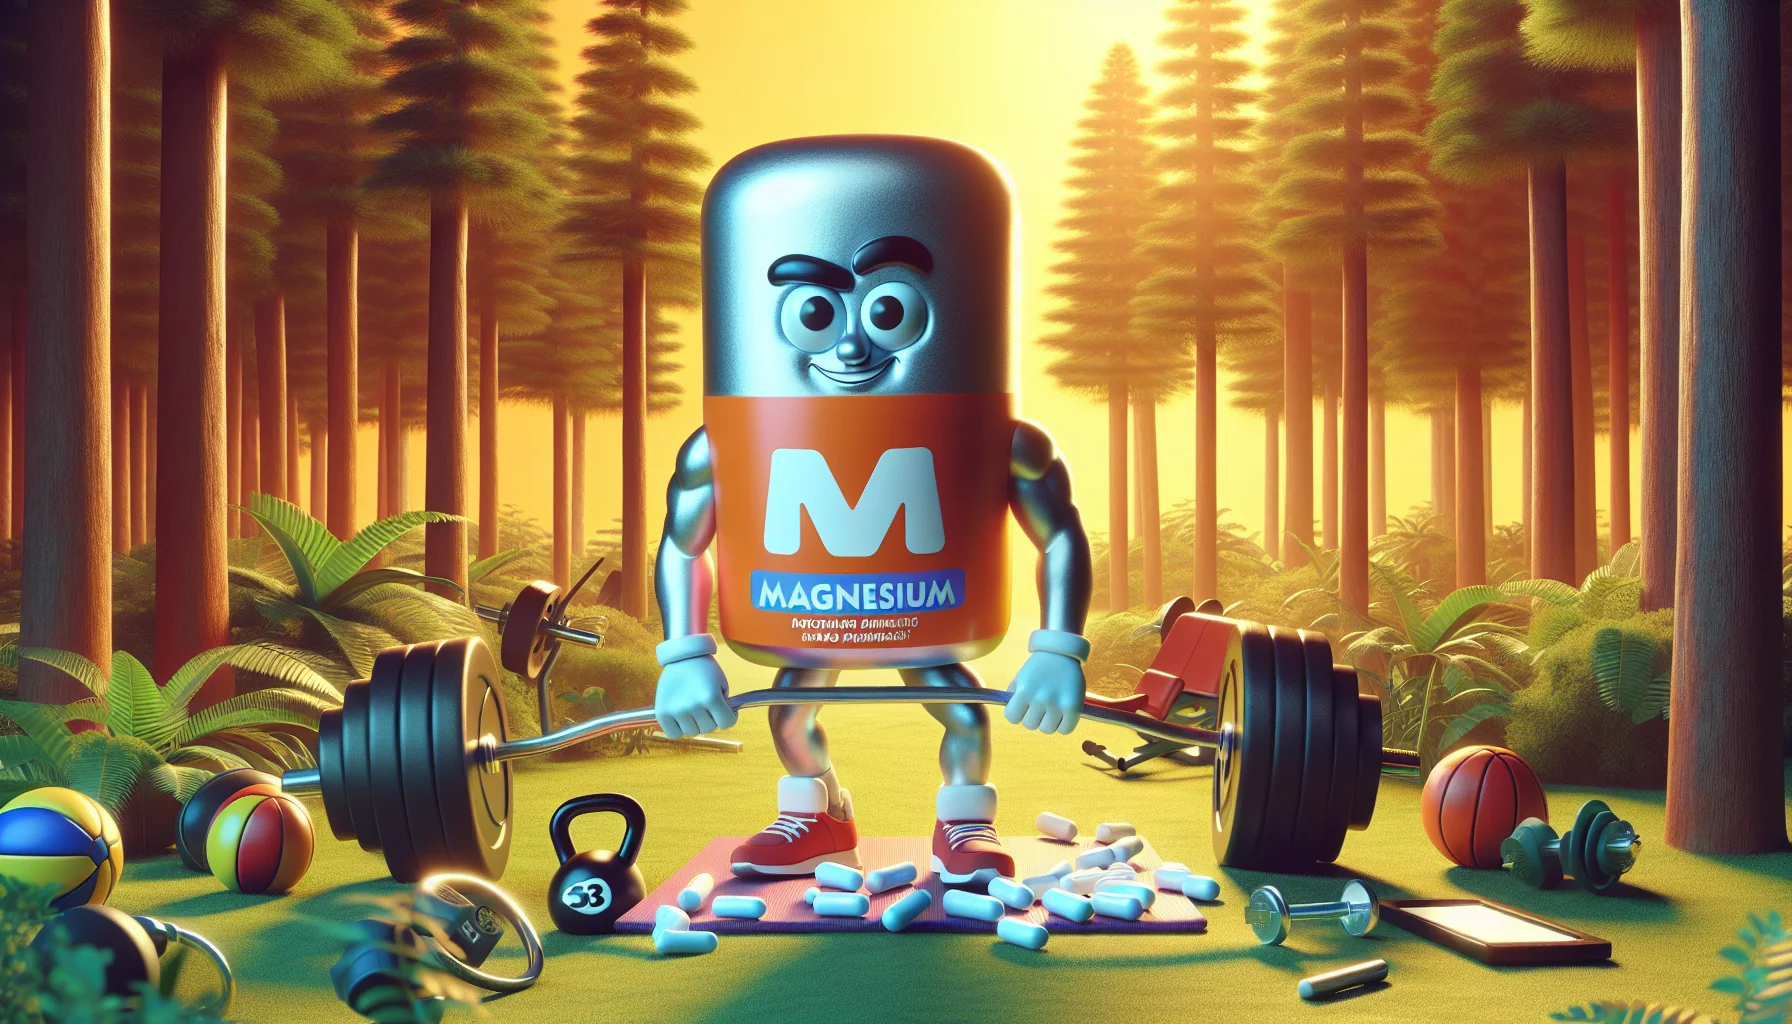 Create an image depicting a humorous scenario, where magnesium supplements are personified as hardworking elements to underscore their effect on athletic performance. In this vivid imagery, envision magnesium as a robust, cartoonish character, lifting weights early in the morning in a forest, symbolizing 'morning wood'. This character embodies the strength and benefits that magnesium provides to sports enthusiasts. Have also an array of sports equipment scattered around the scene to highlight the sports supplementation aspect. Use an inviting and vibrant color scheme to create a compelling and enticing atmosphere.